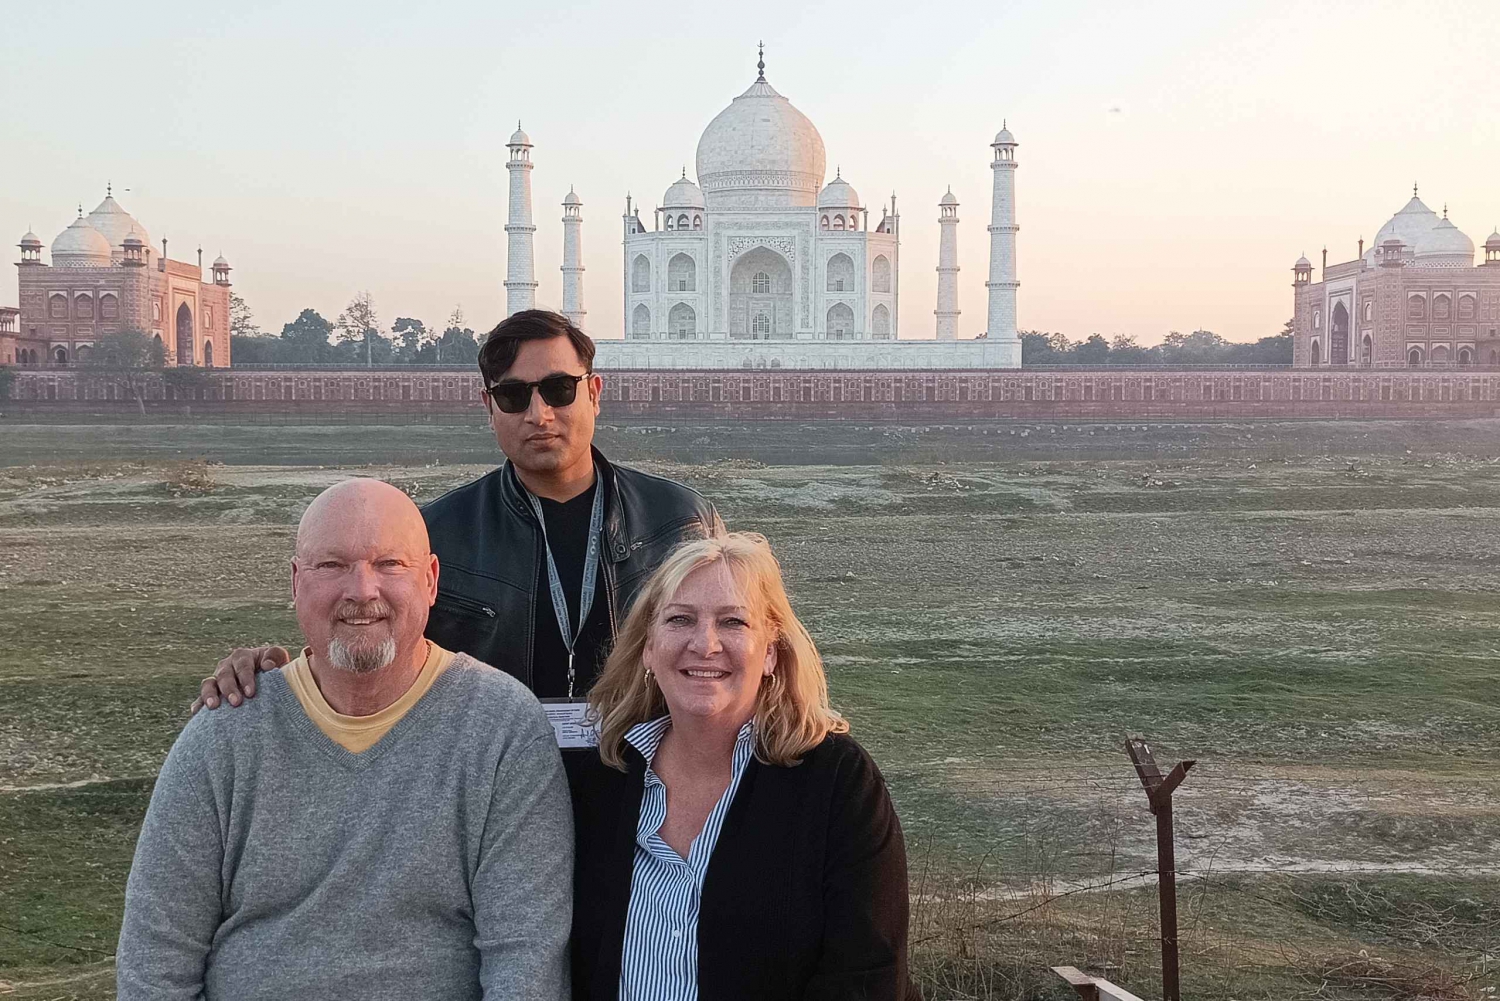 From New Delhi: Guided Day Trip to Agra by Superfast Train